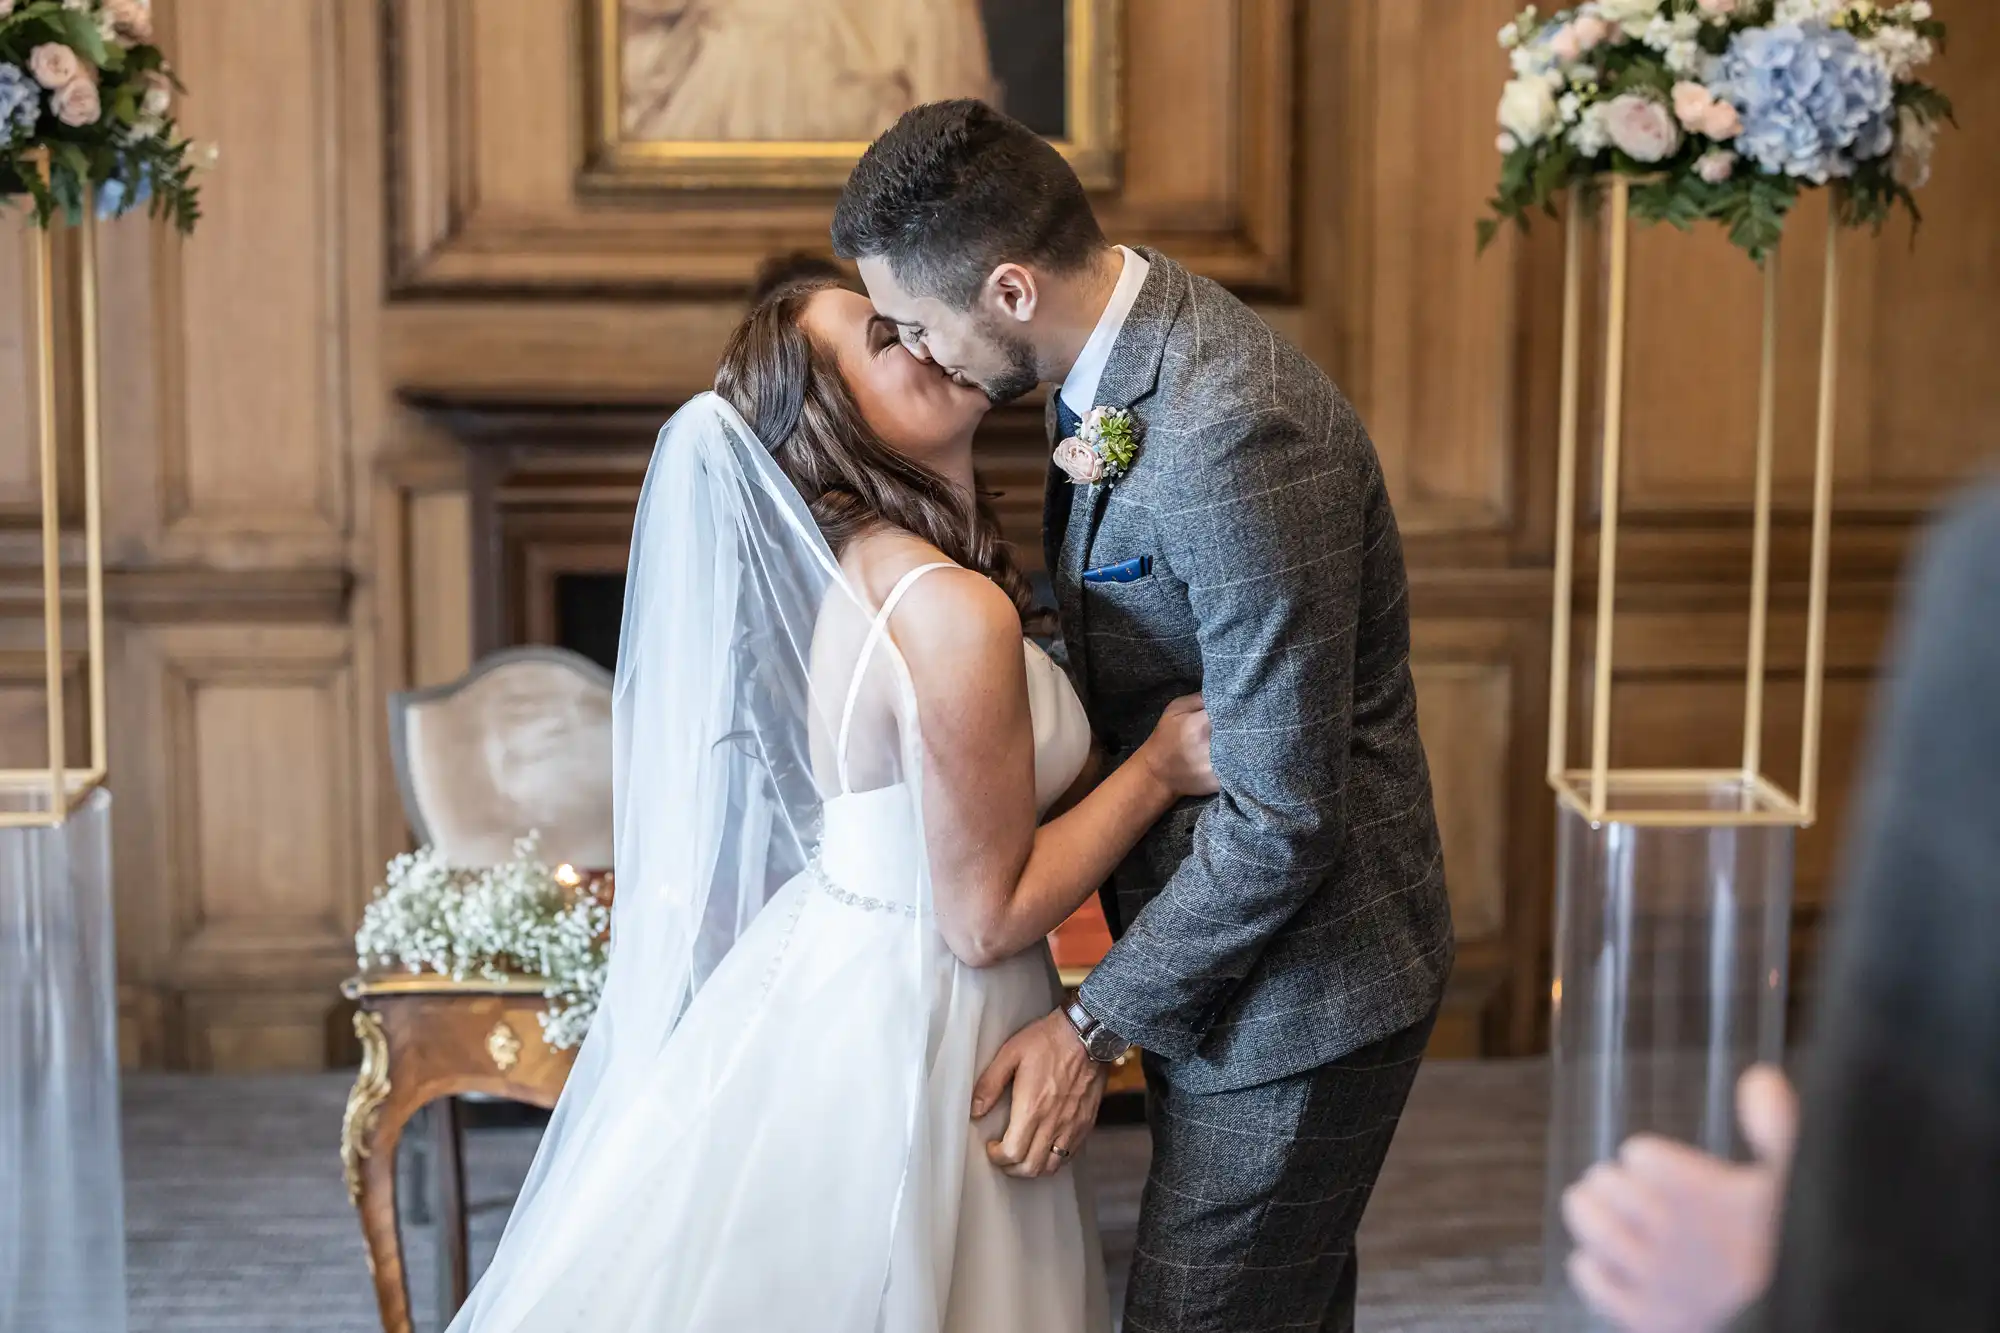 A newlywed couple kissing passionately inside a beautifully decorated room with floral arrangements.